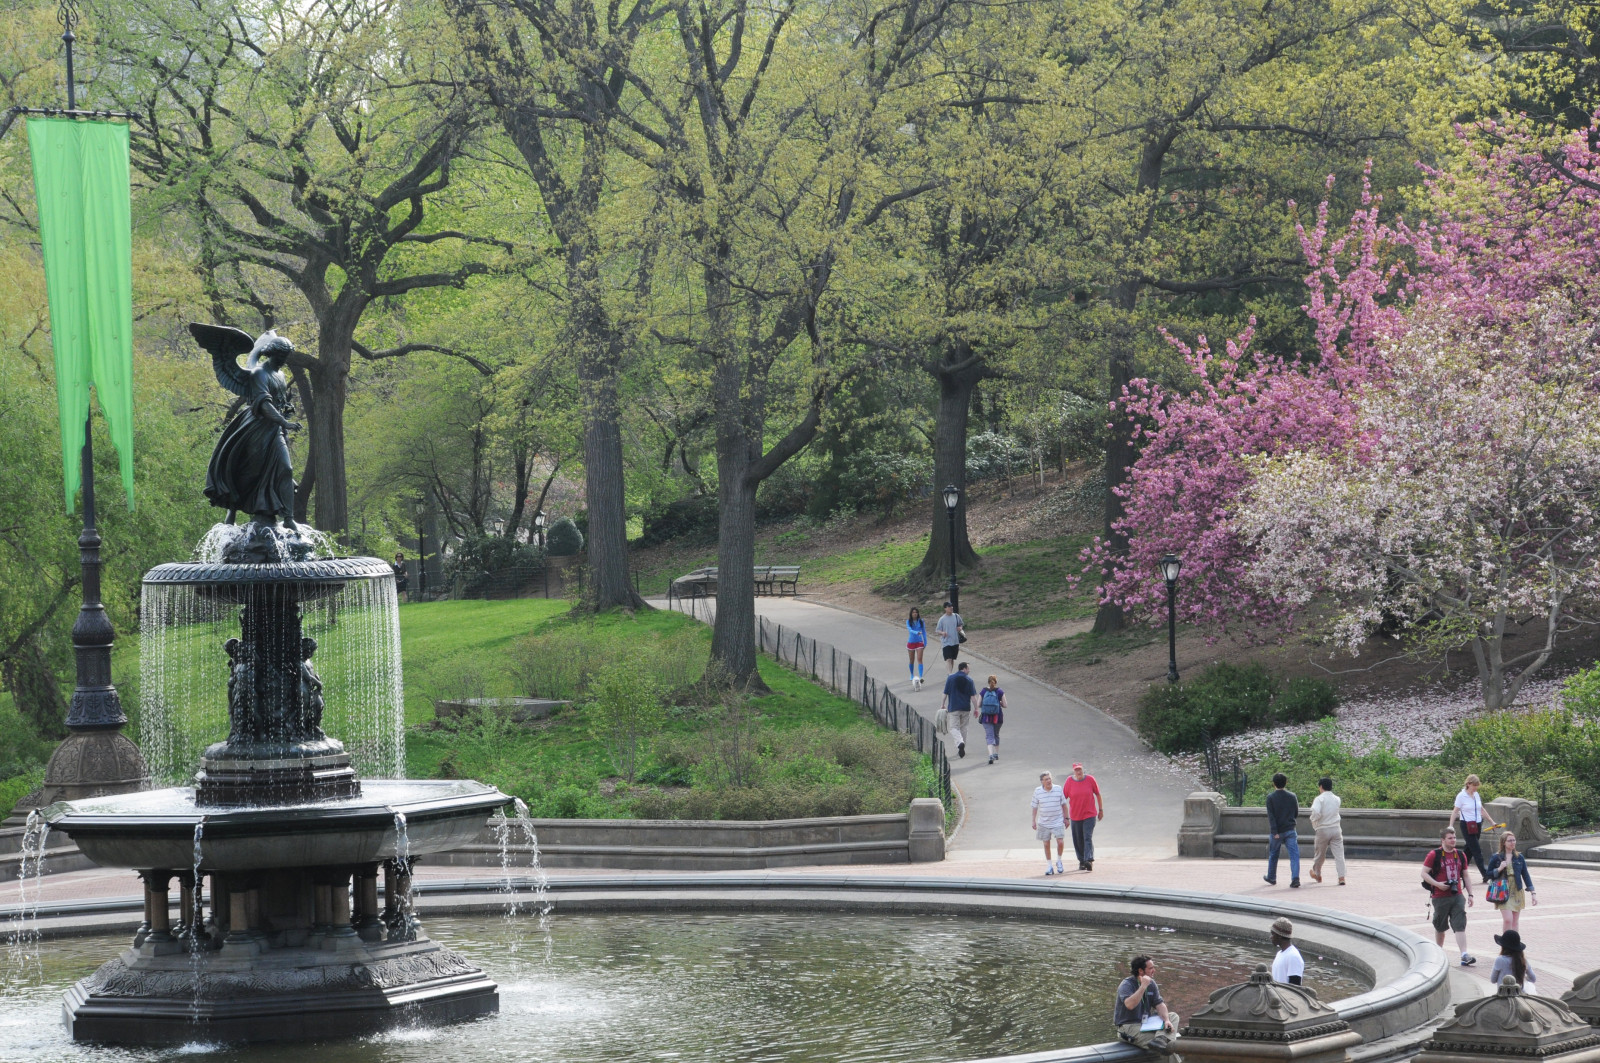 Central Park Monuments - Bethesda Fountain and Terrace : NYC Parks